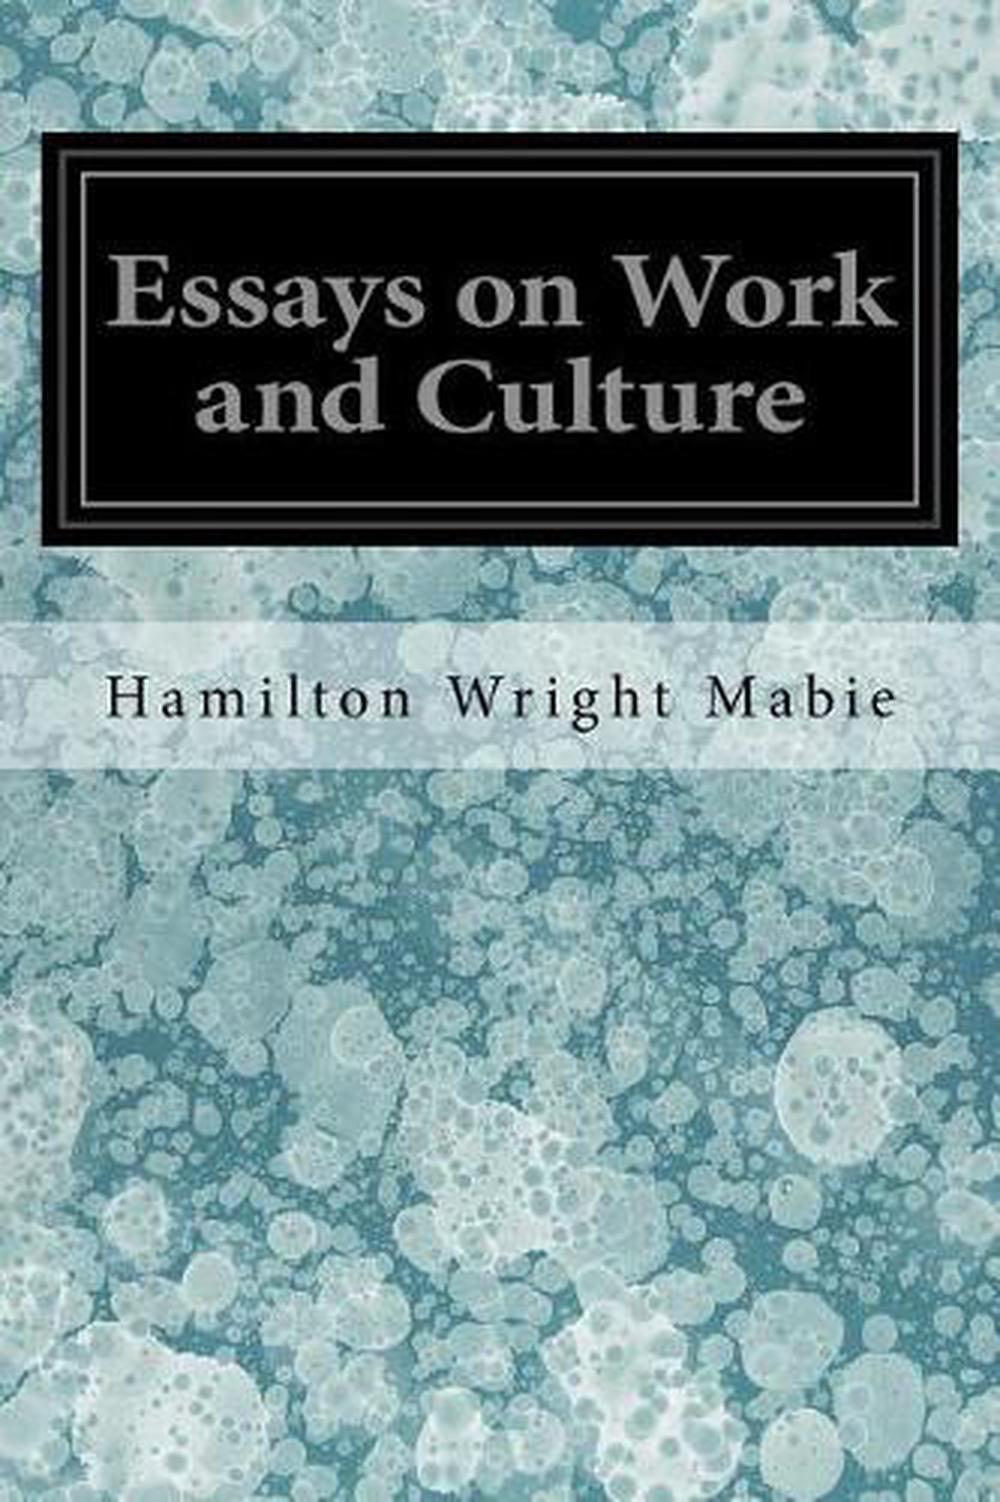 essays on work and culture by hamilton wright mabie